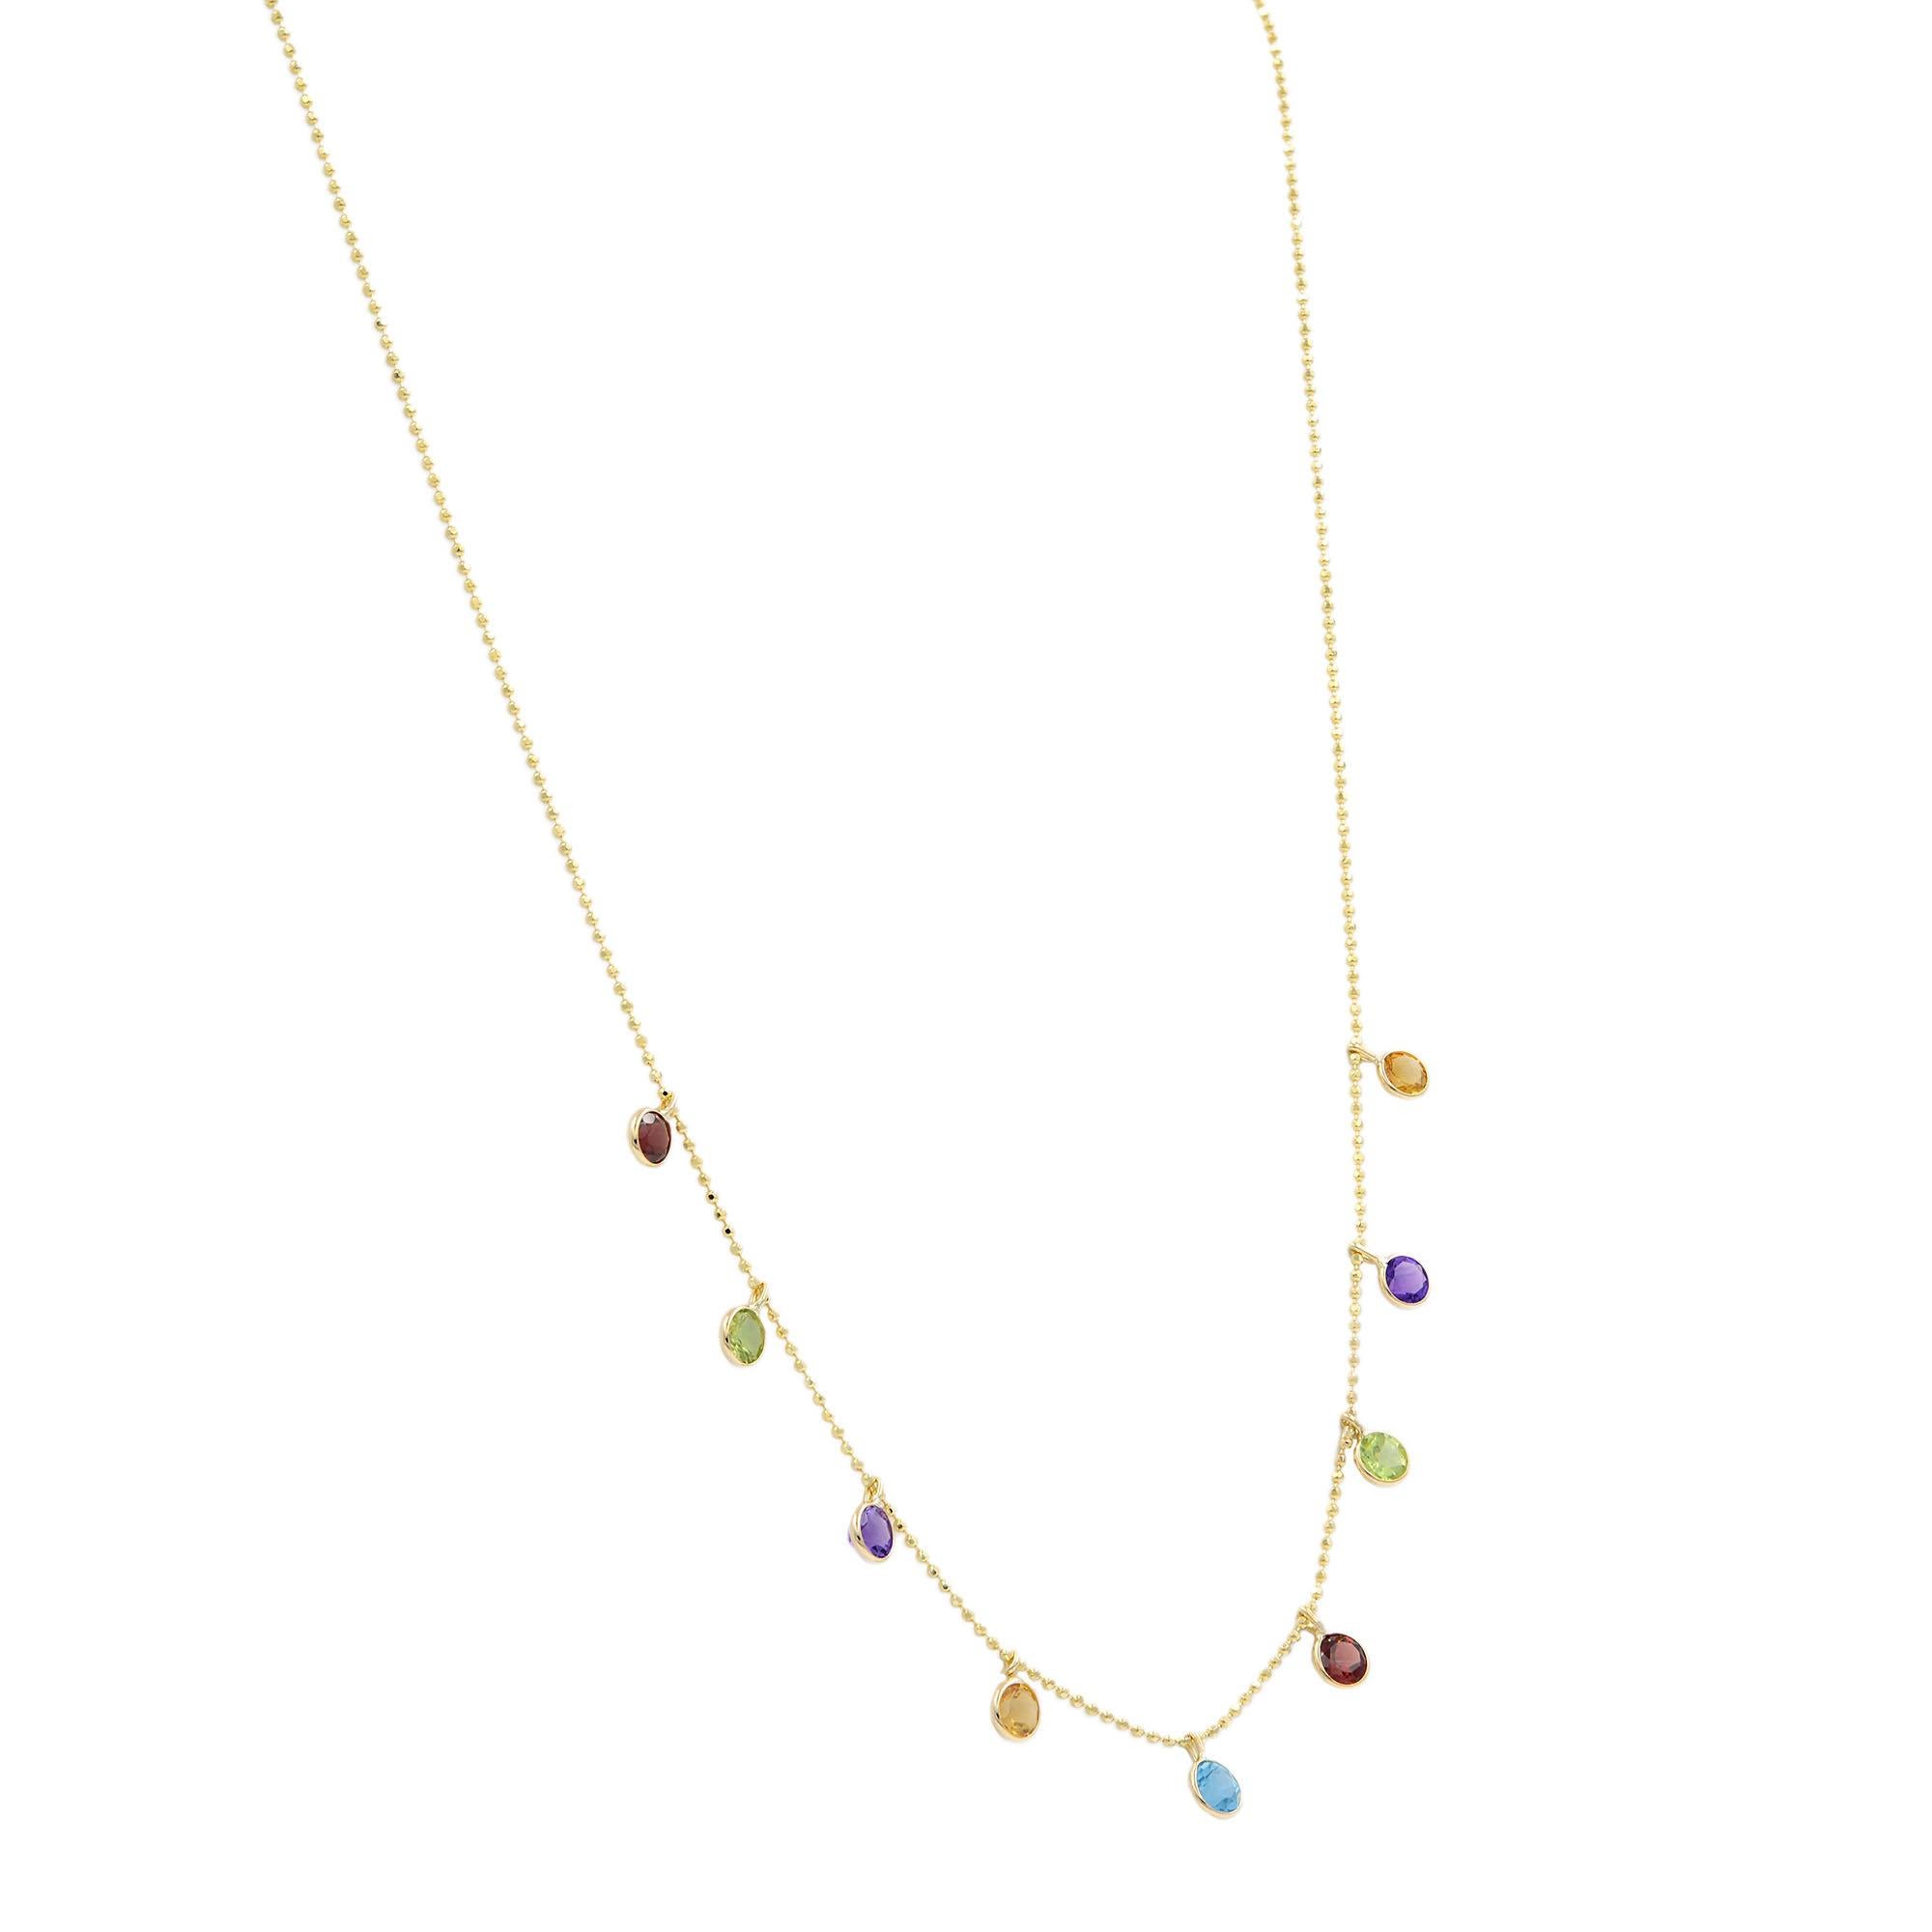 Round Cut Rachel Koen Gemstone by The Yard Chain Necklace 14K Yellow Gold For Sale